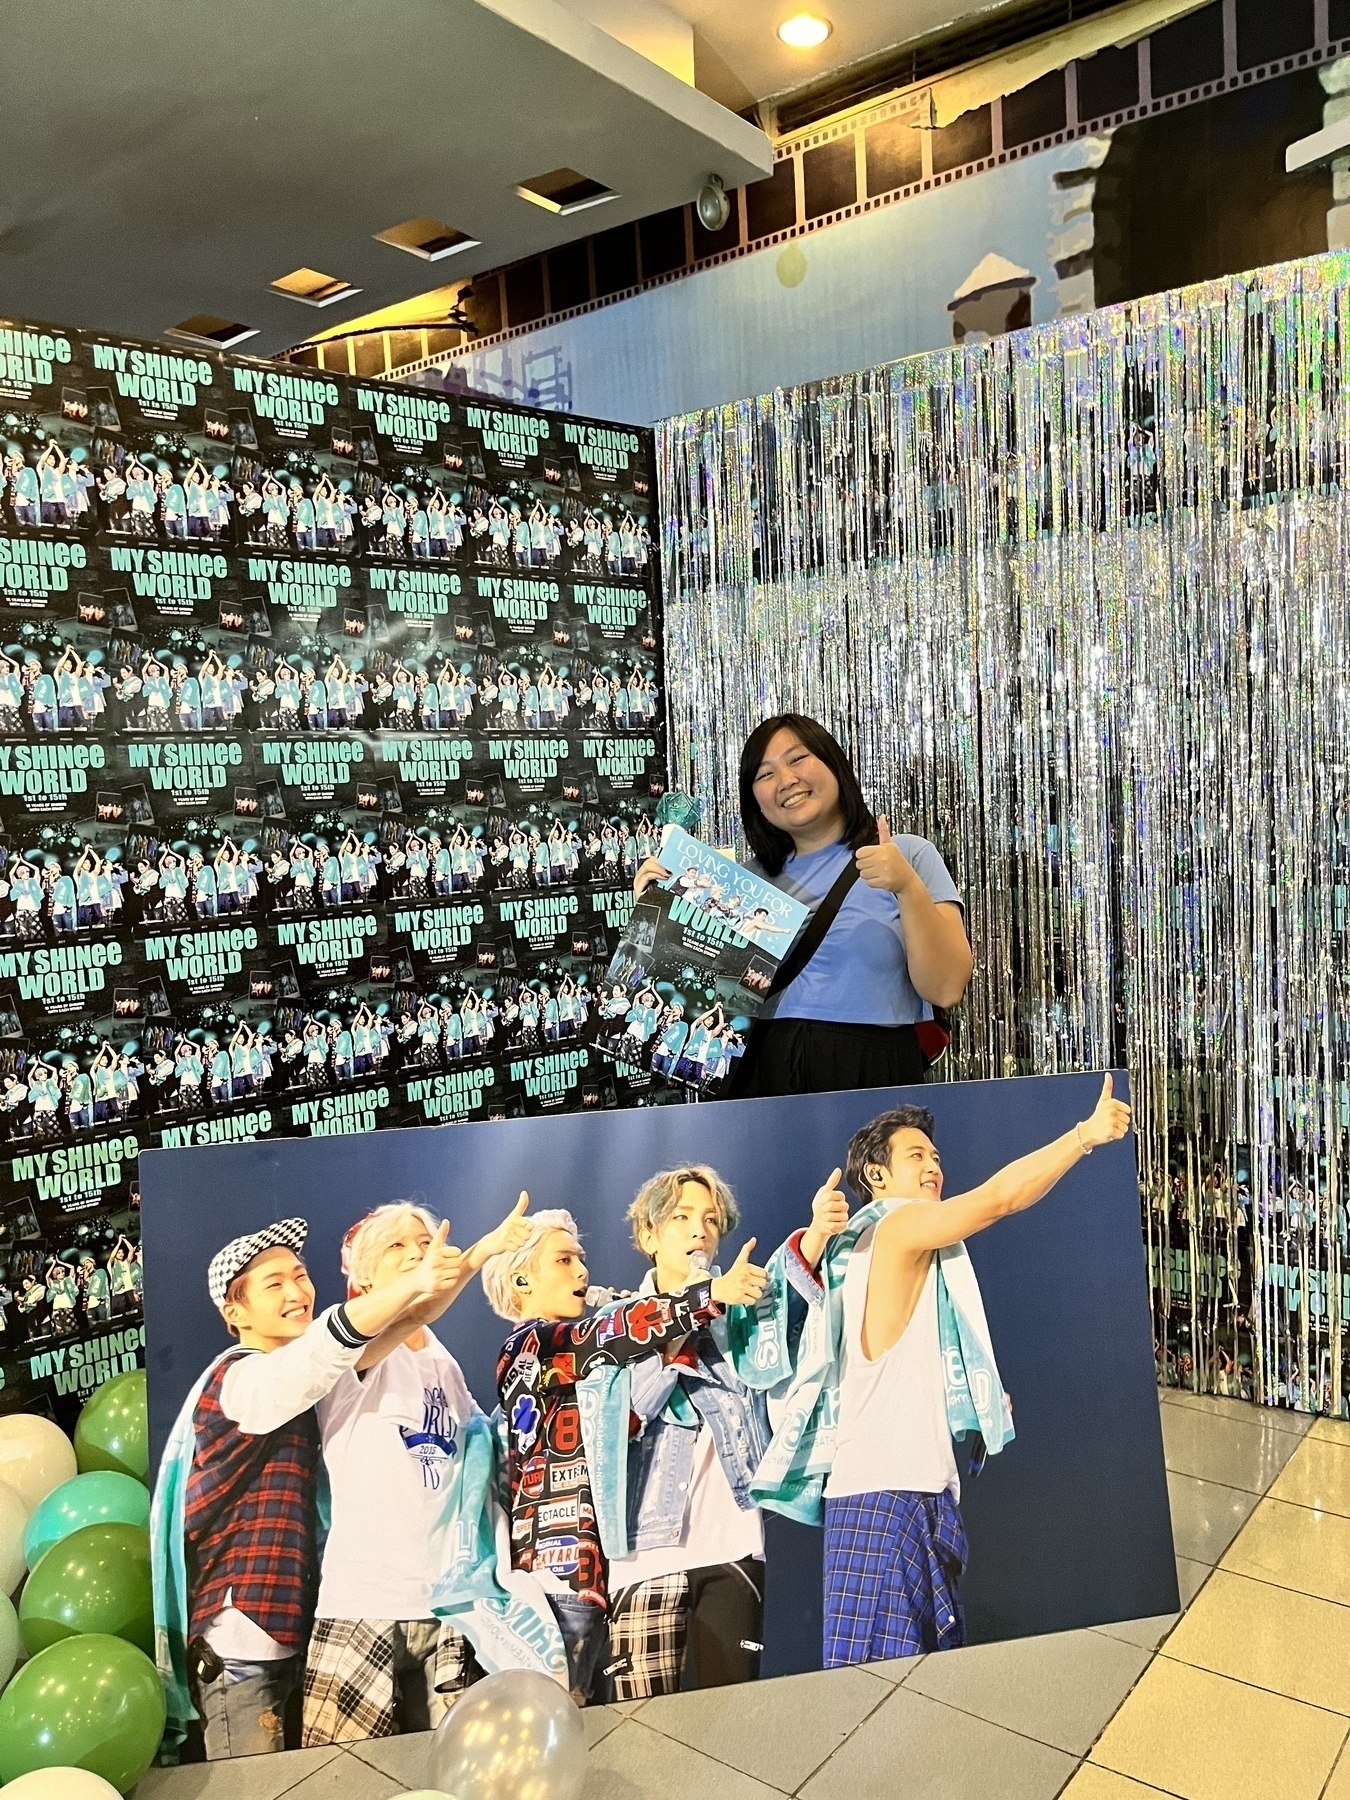 A photo of Chi with the MY SHINee WORLD movie poster backdrop and with freebies from the documentary premiere. In front of her are a photo of the SHINee members (from left to right): Onew, Taemin, Jonghyun, Key, and Minho all pointing a thumbs up to the right side during one of their concerts. Chi is also posing with a thumbs up to join the SHINee members.